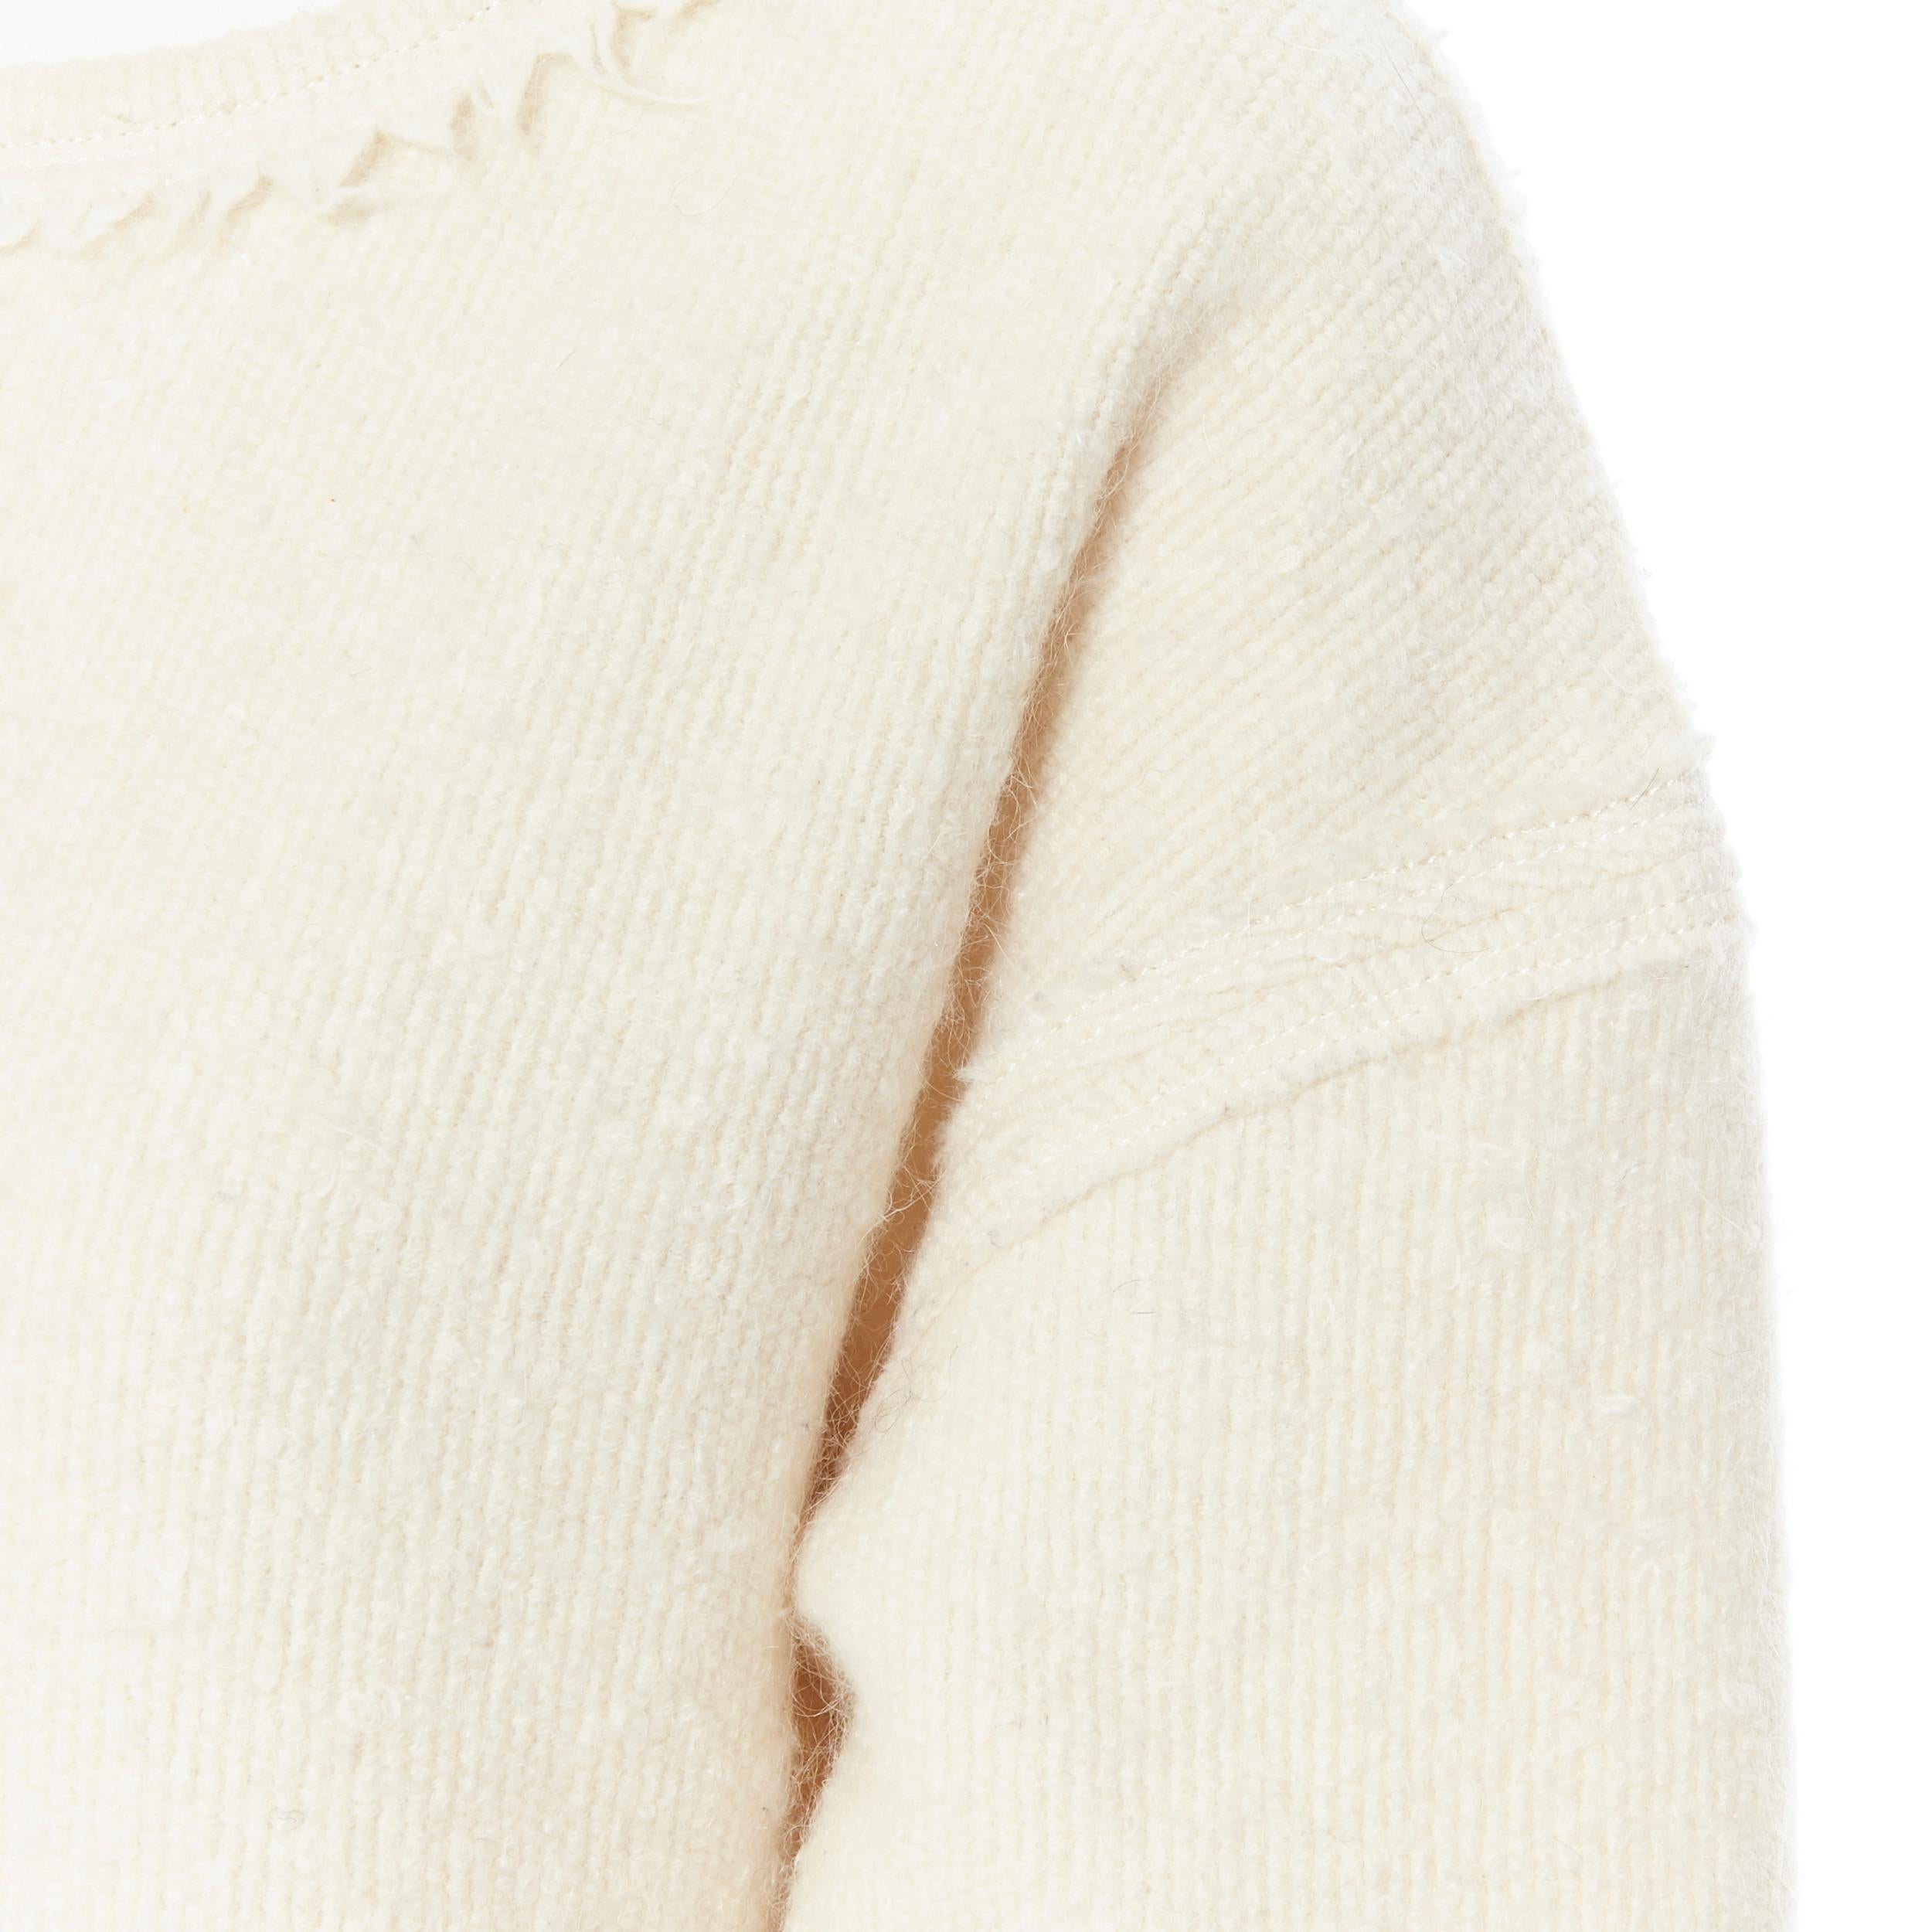 ISABEL MARANT beige virgin wool mohair blend oversized  boxy sweater FR36 
Brand: Isabel Marant
Designer: Isabel Marant
Model Name / Style: Ovesized sweater
Material: Wool, mohair
Color: Beige
Pattern: Solid
Closure: Pull on
Extra Detail: Fringe